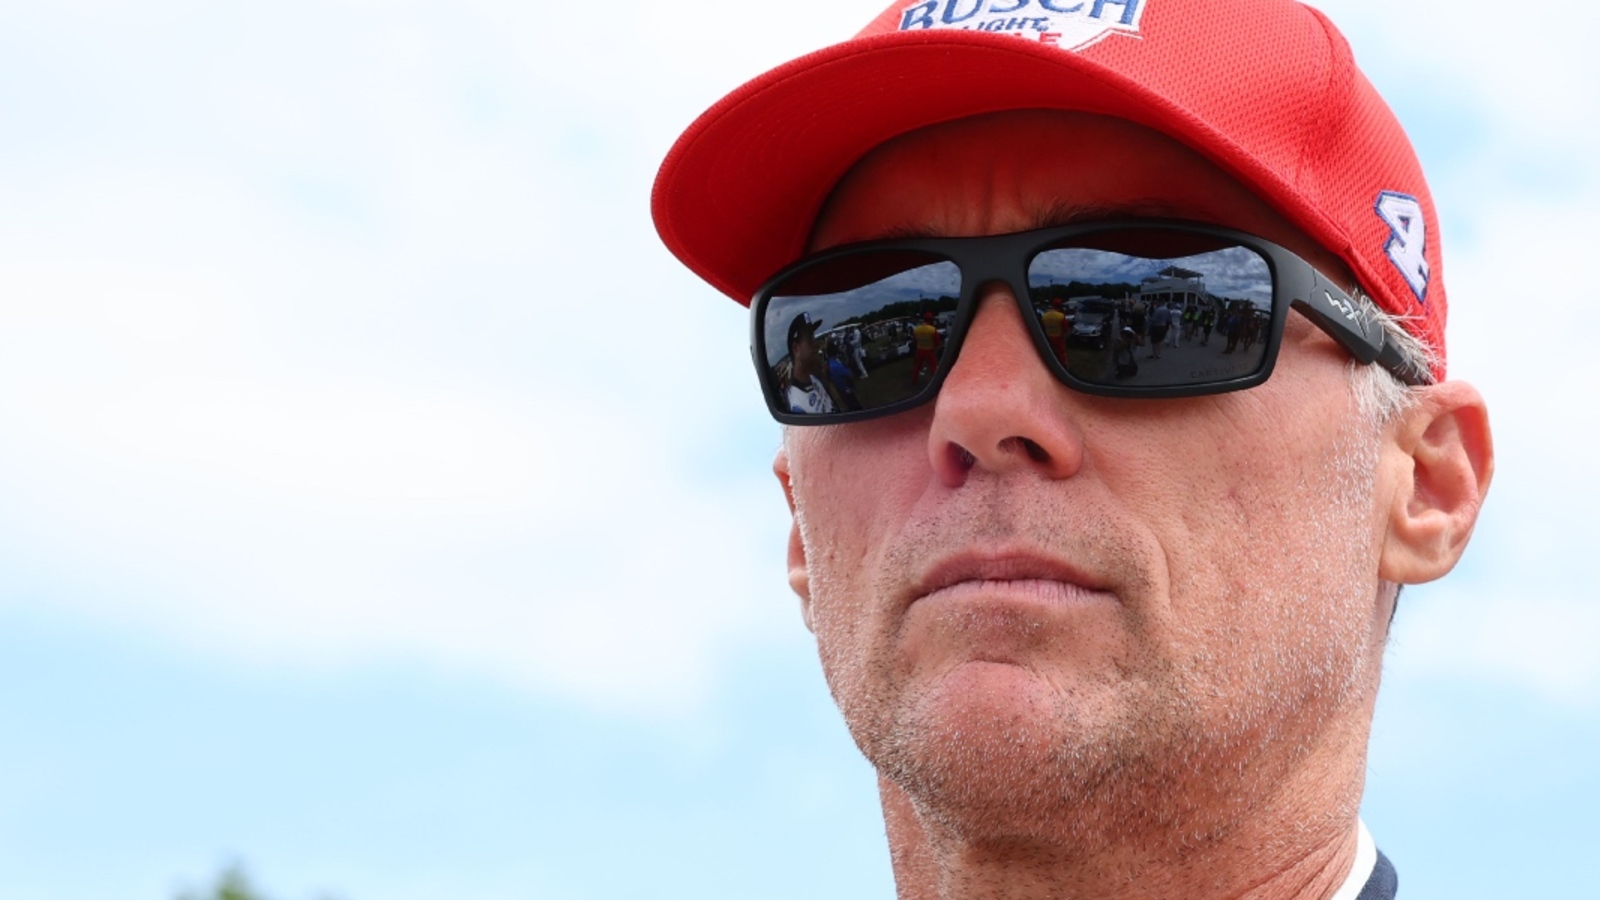 Kevin Harvick speculates on silly season rumors, predicts wildest one yet